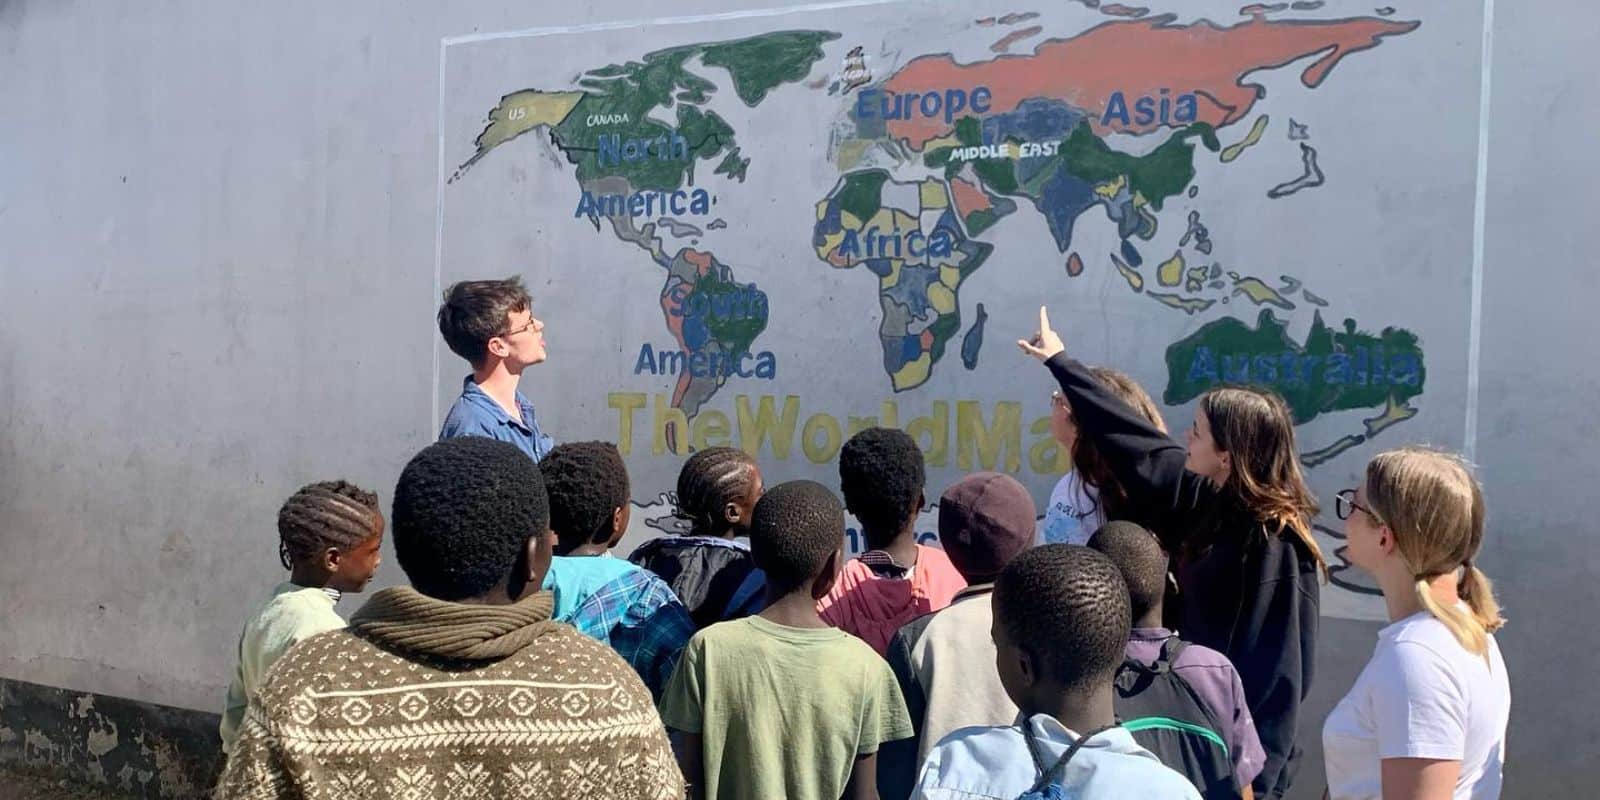 a foreign woman pointing to a map painted in a wall surrounded by other foreign and local people